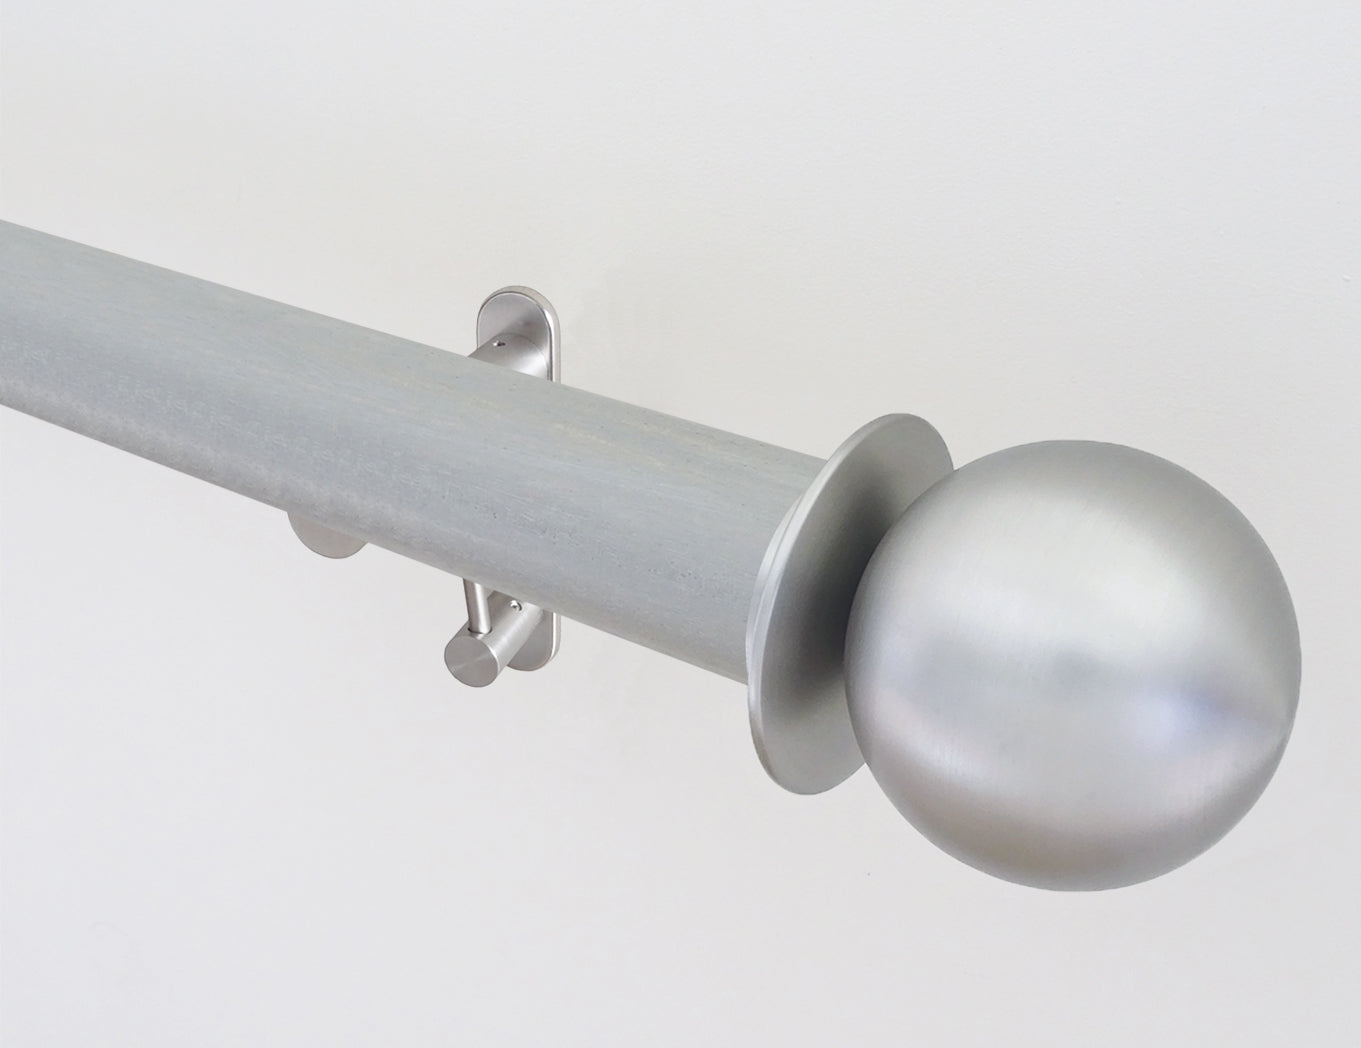 50mm dia. wood pigeon stained wood curtain pole with metal ball finials